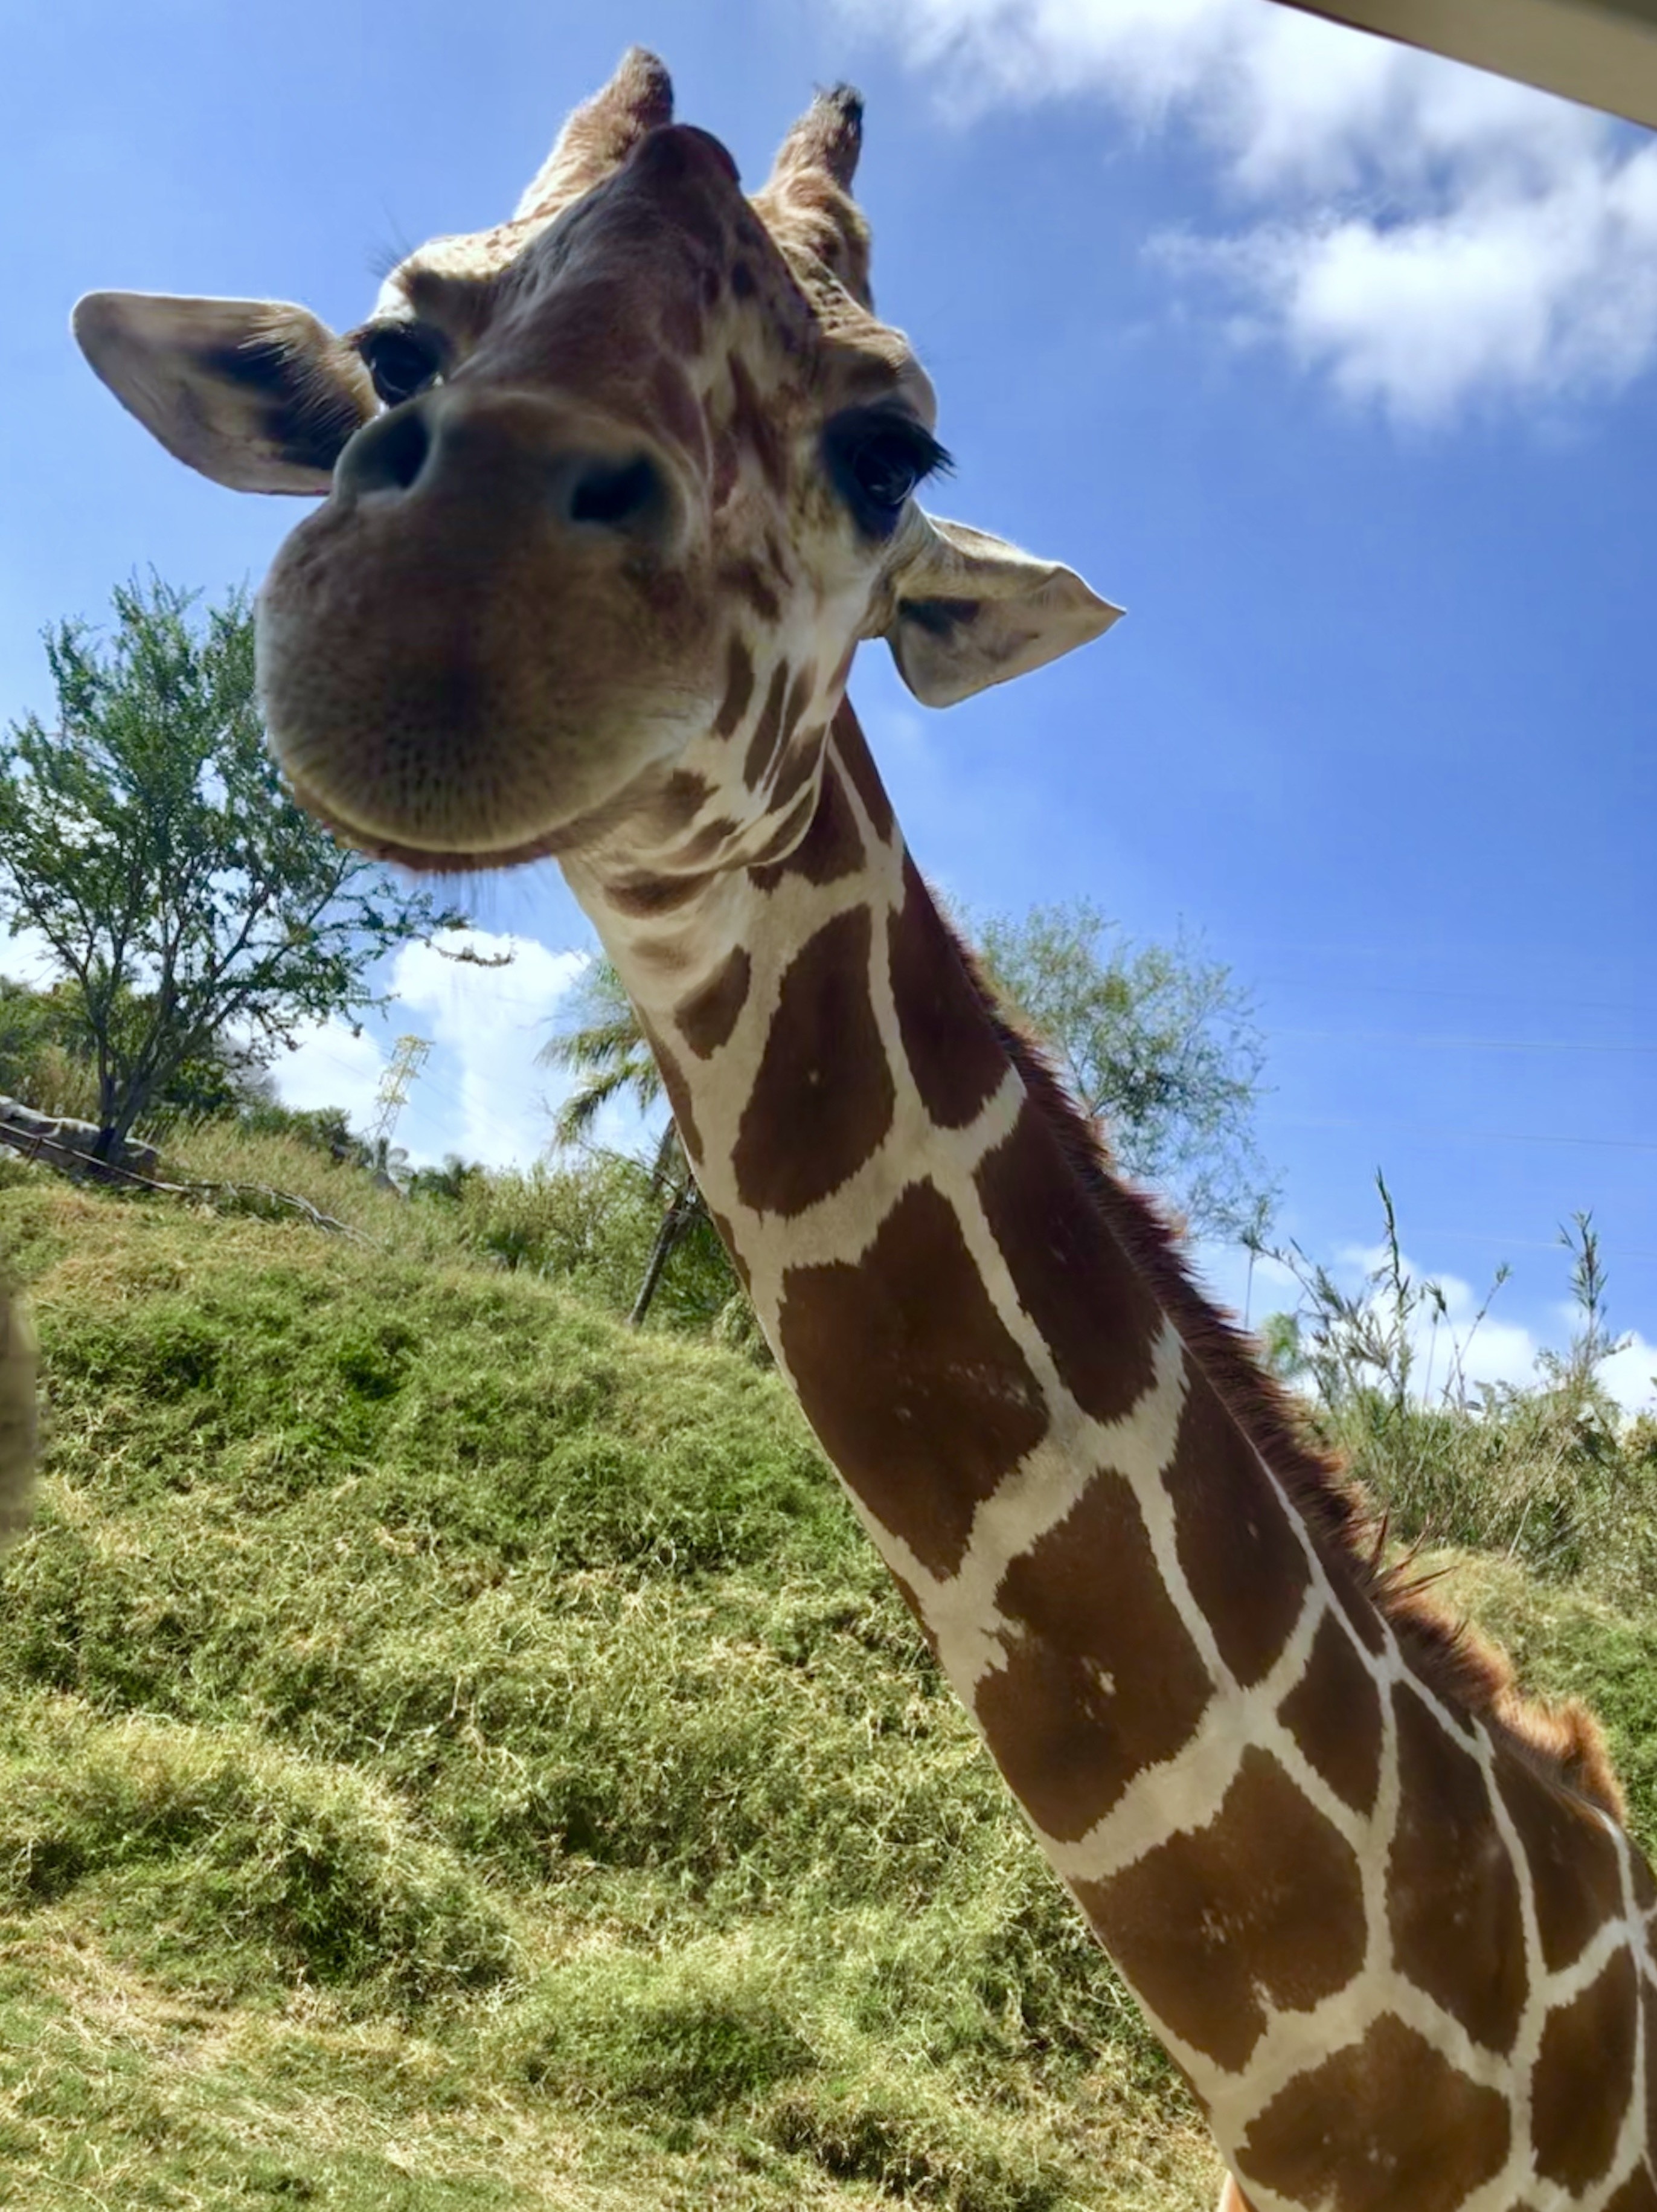 who’s gonna give me some carrots? #giraffe #zoo #upclose #animals #nature